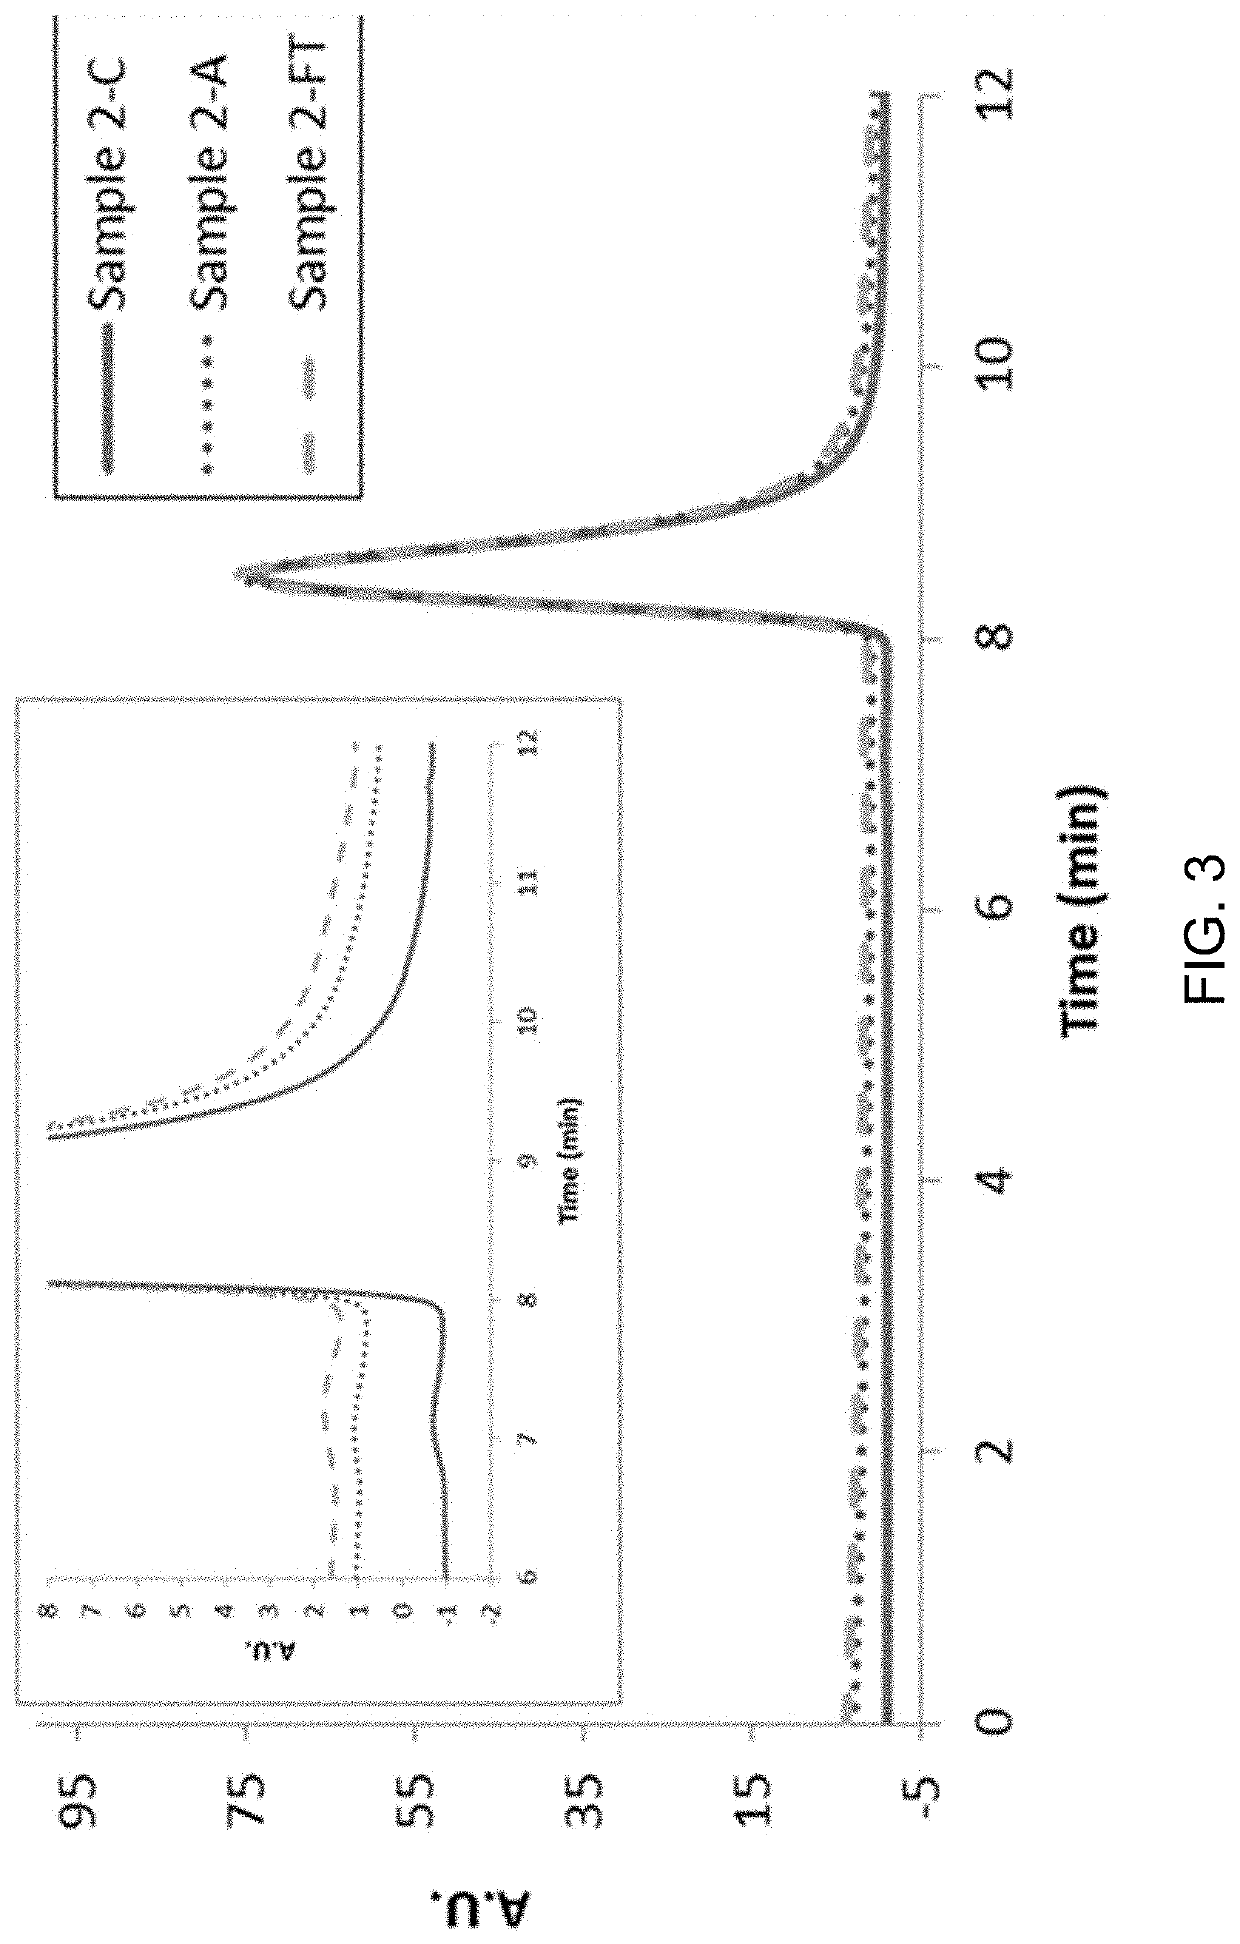 Excipient compounds for protein formulations